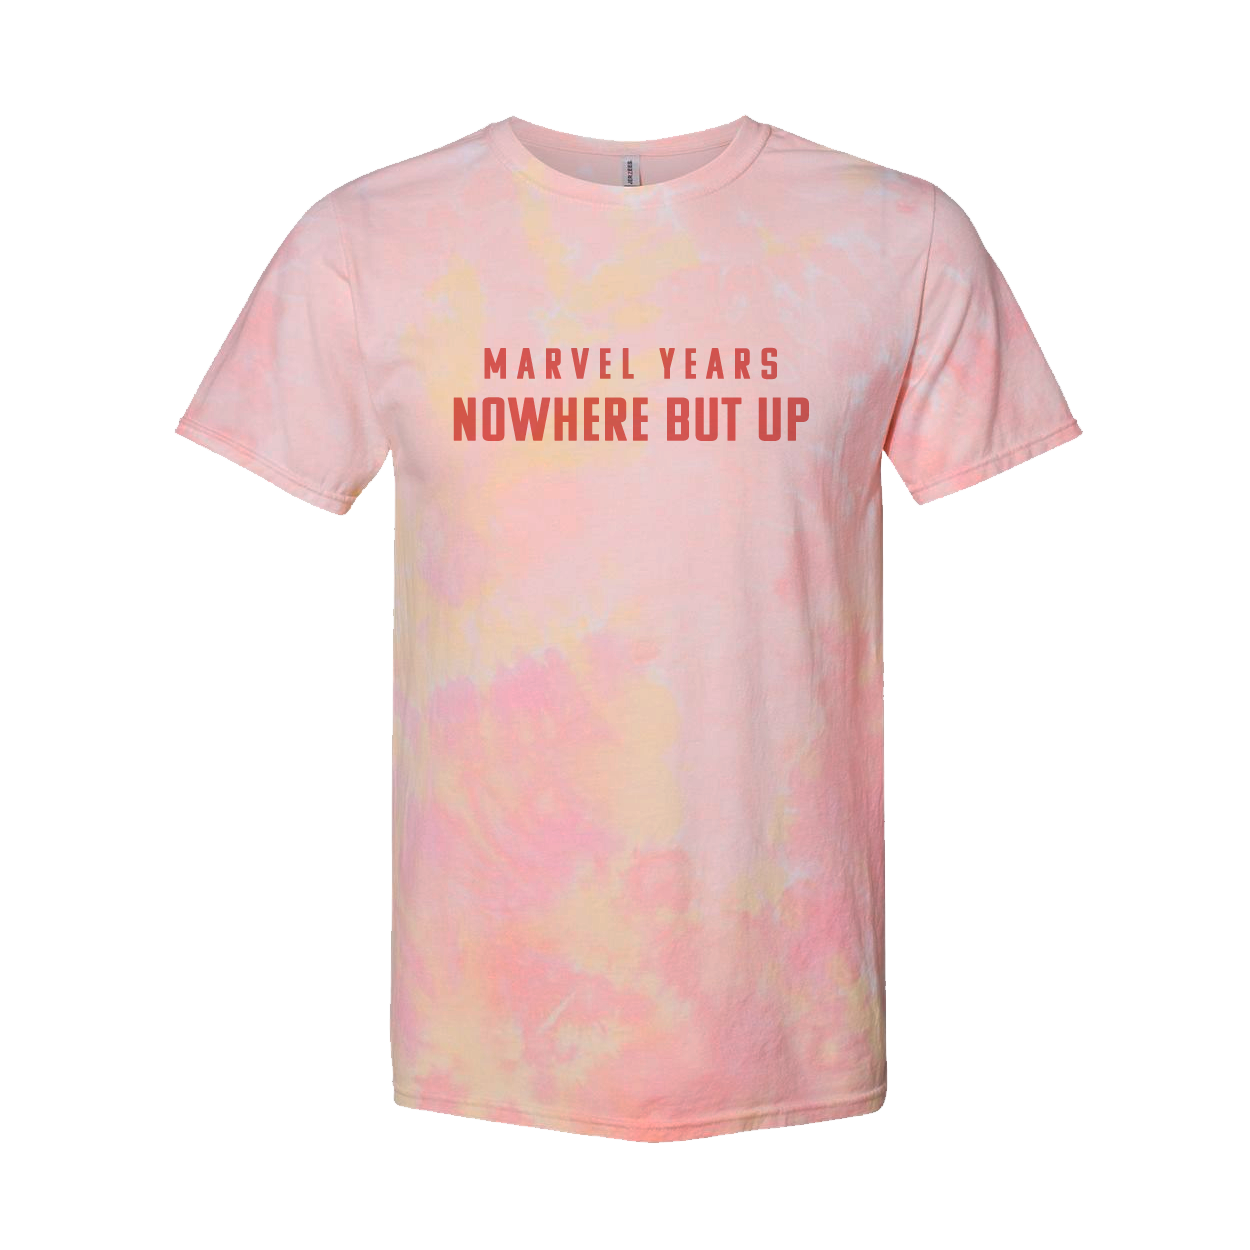 Nowhere But Up EP - T-Shirt Presale (10 Year Anniversary)